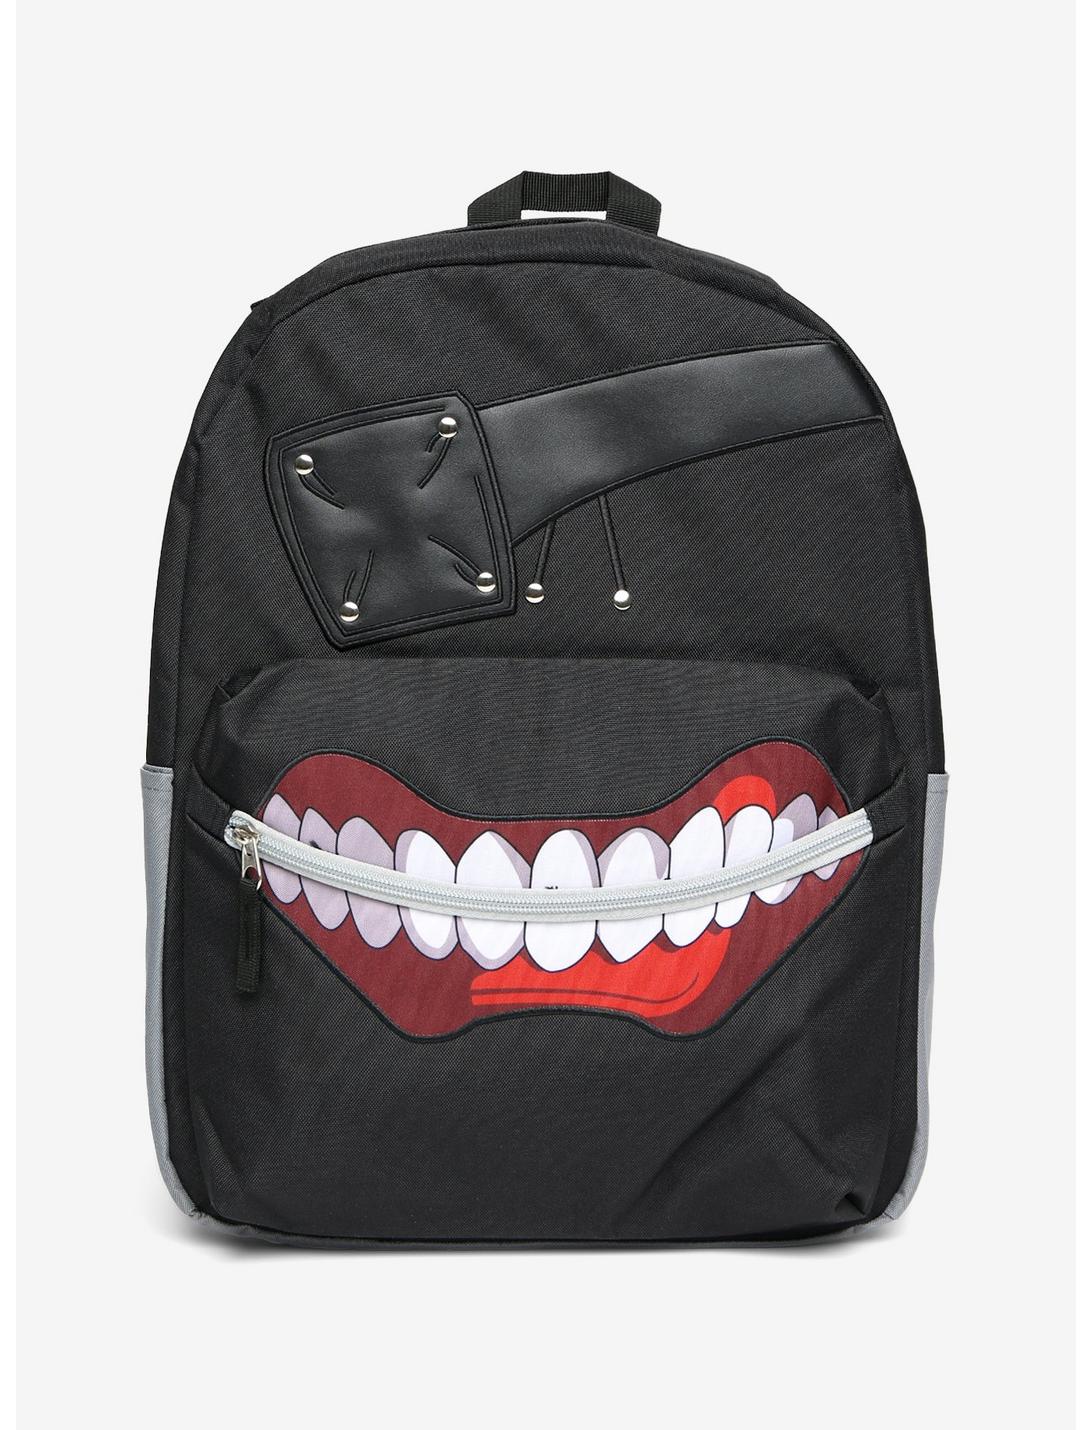 Tokyo Ghoul Mask Backpack | Hot Topic